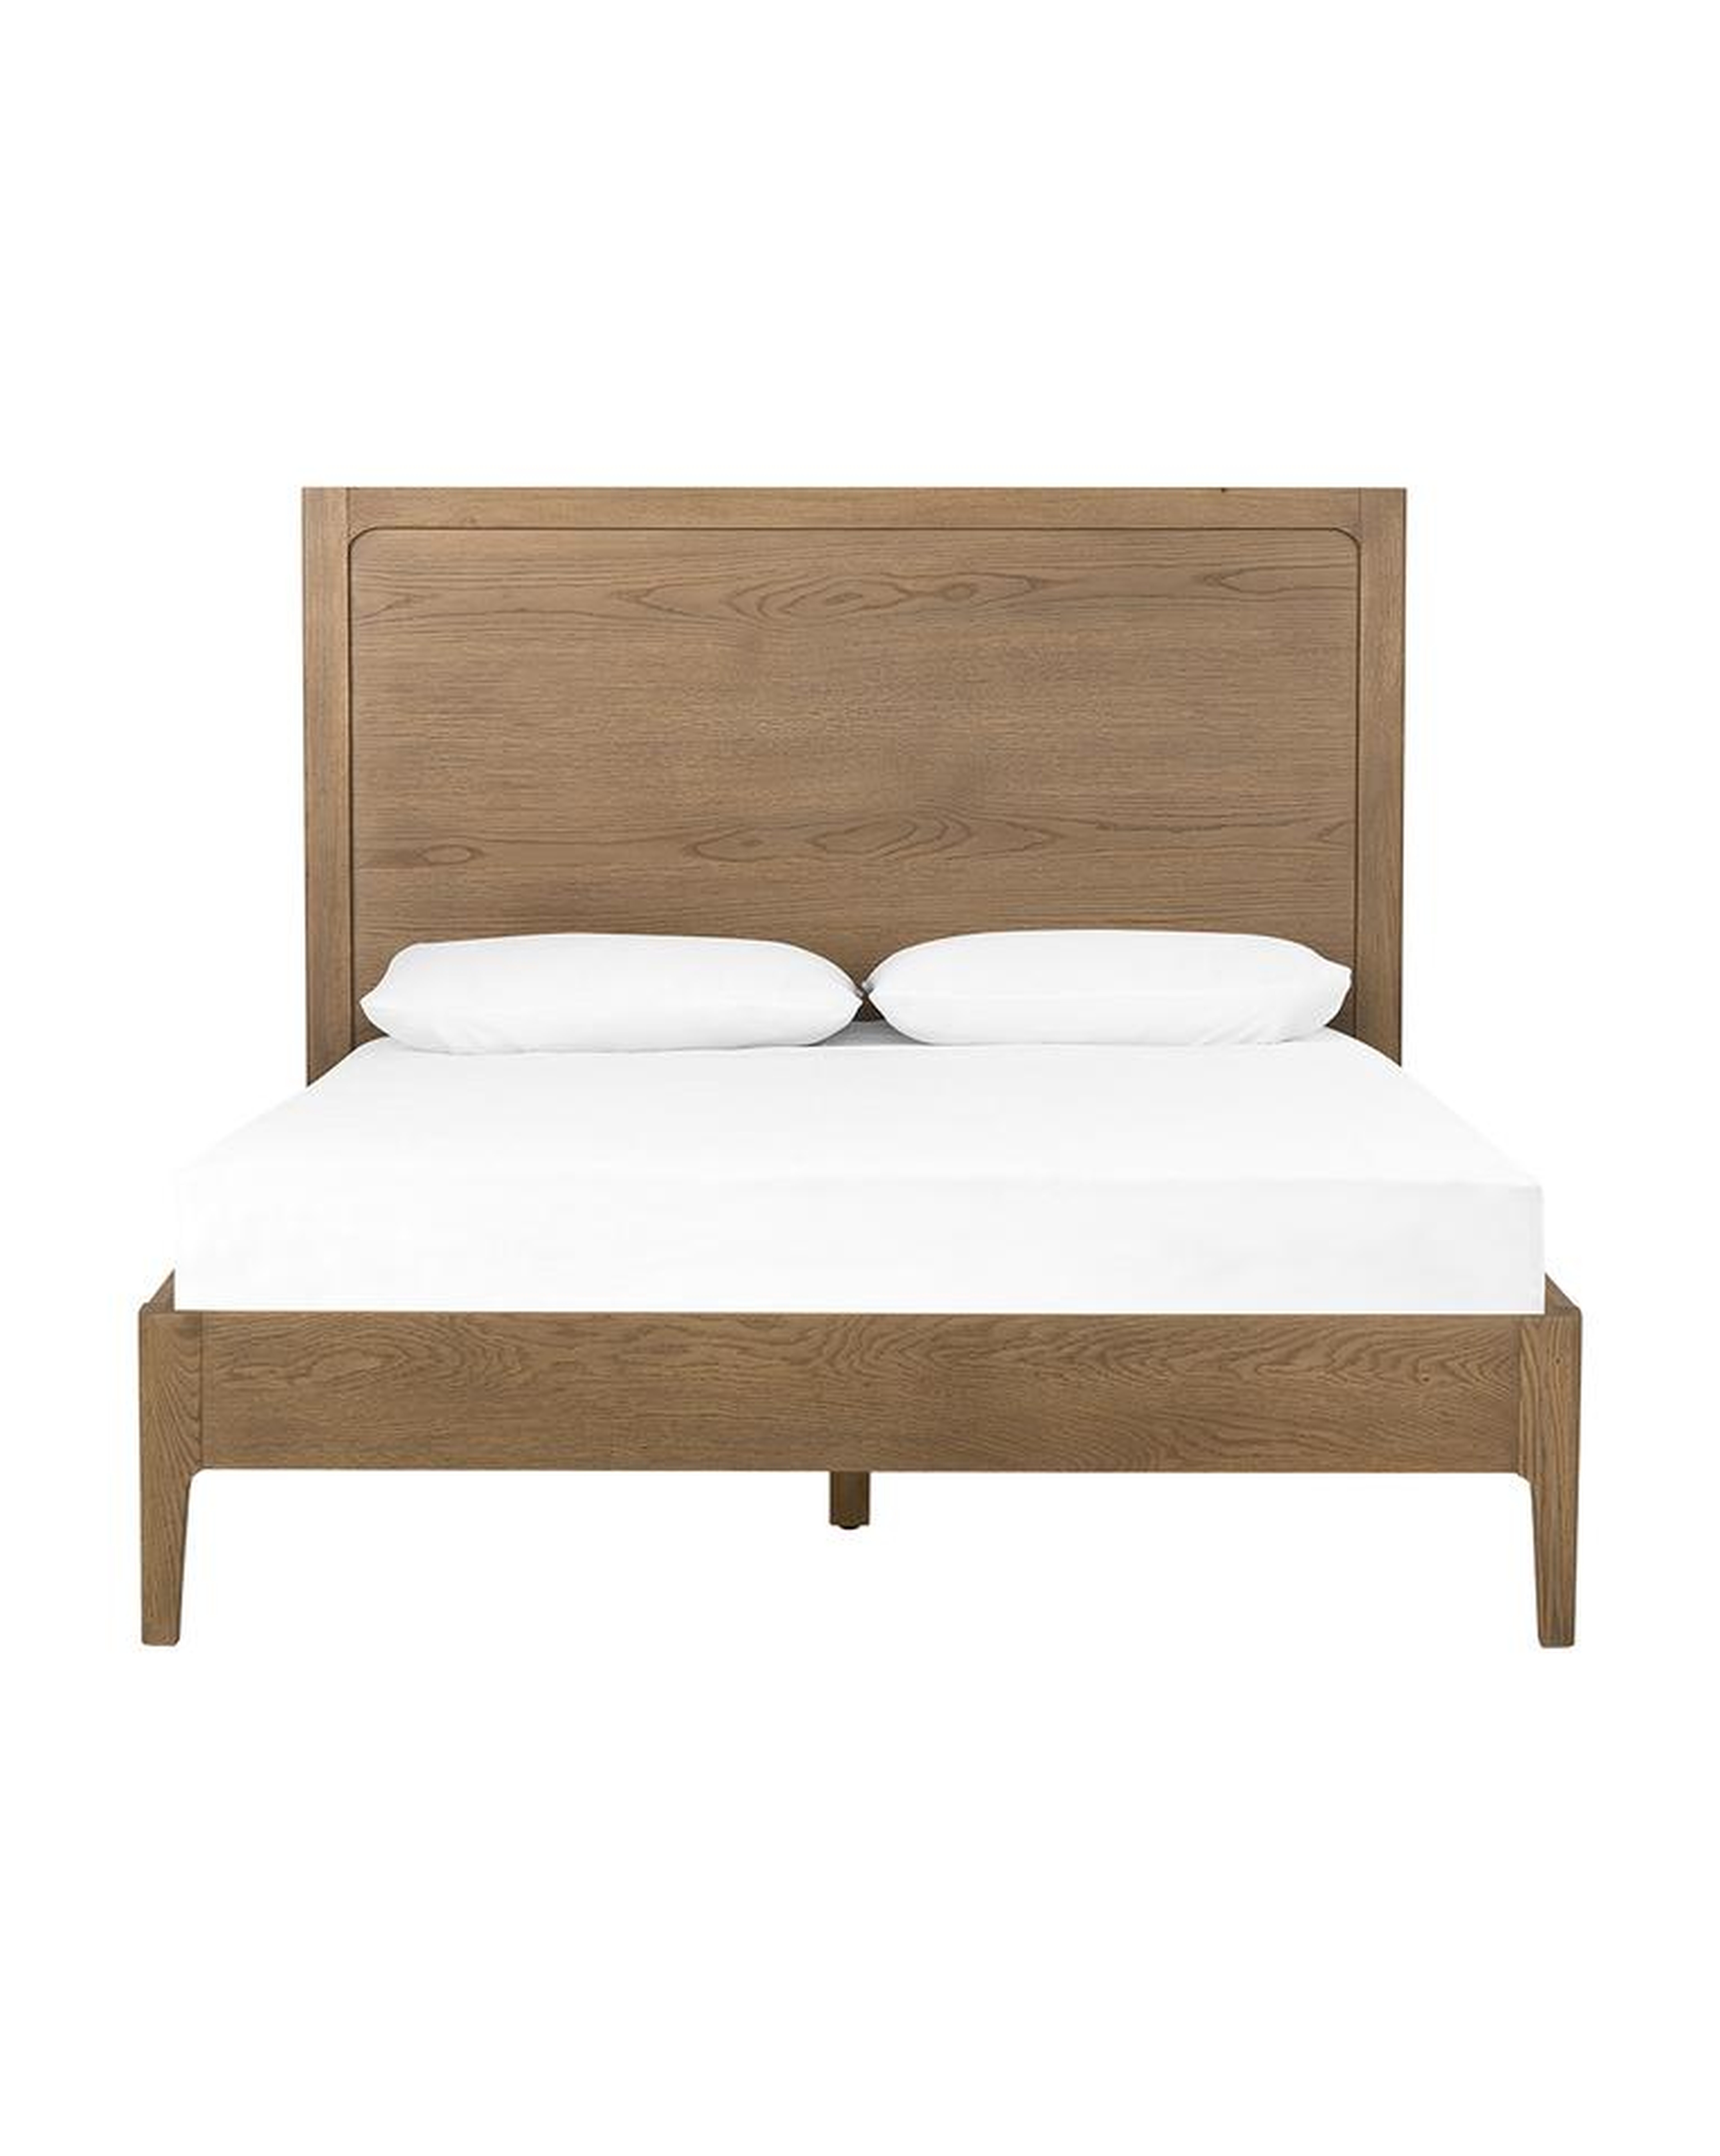 LUCCA BED - King - McGee & Co.